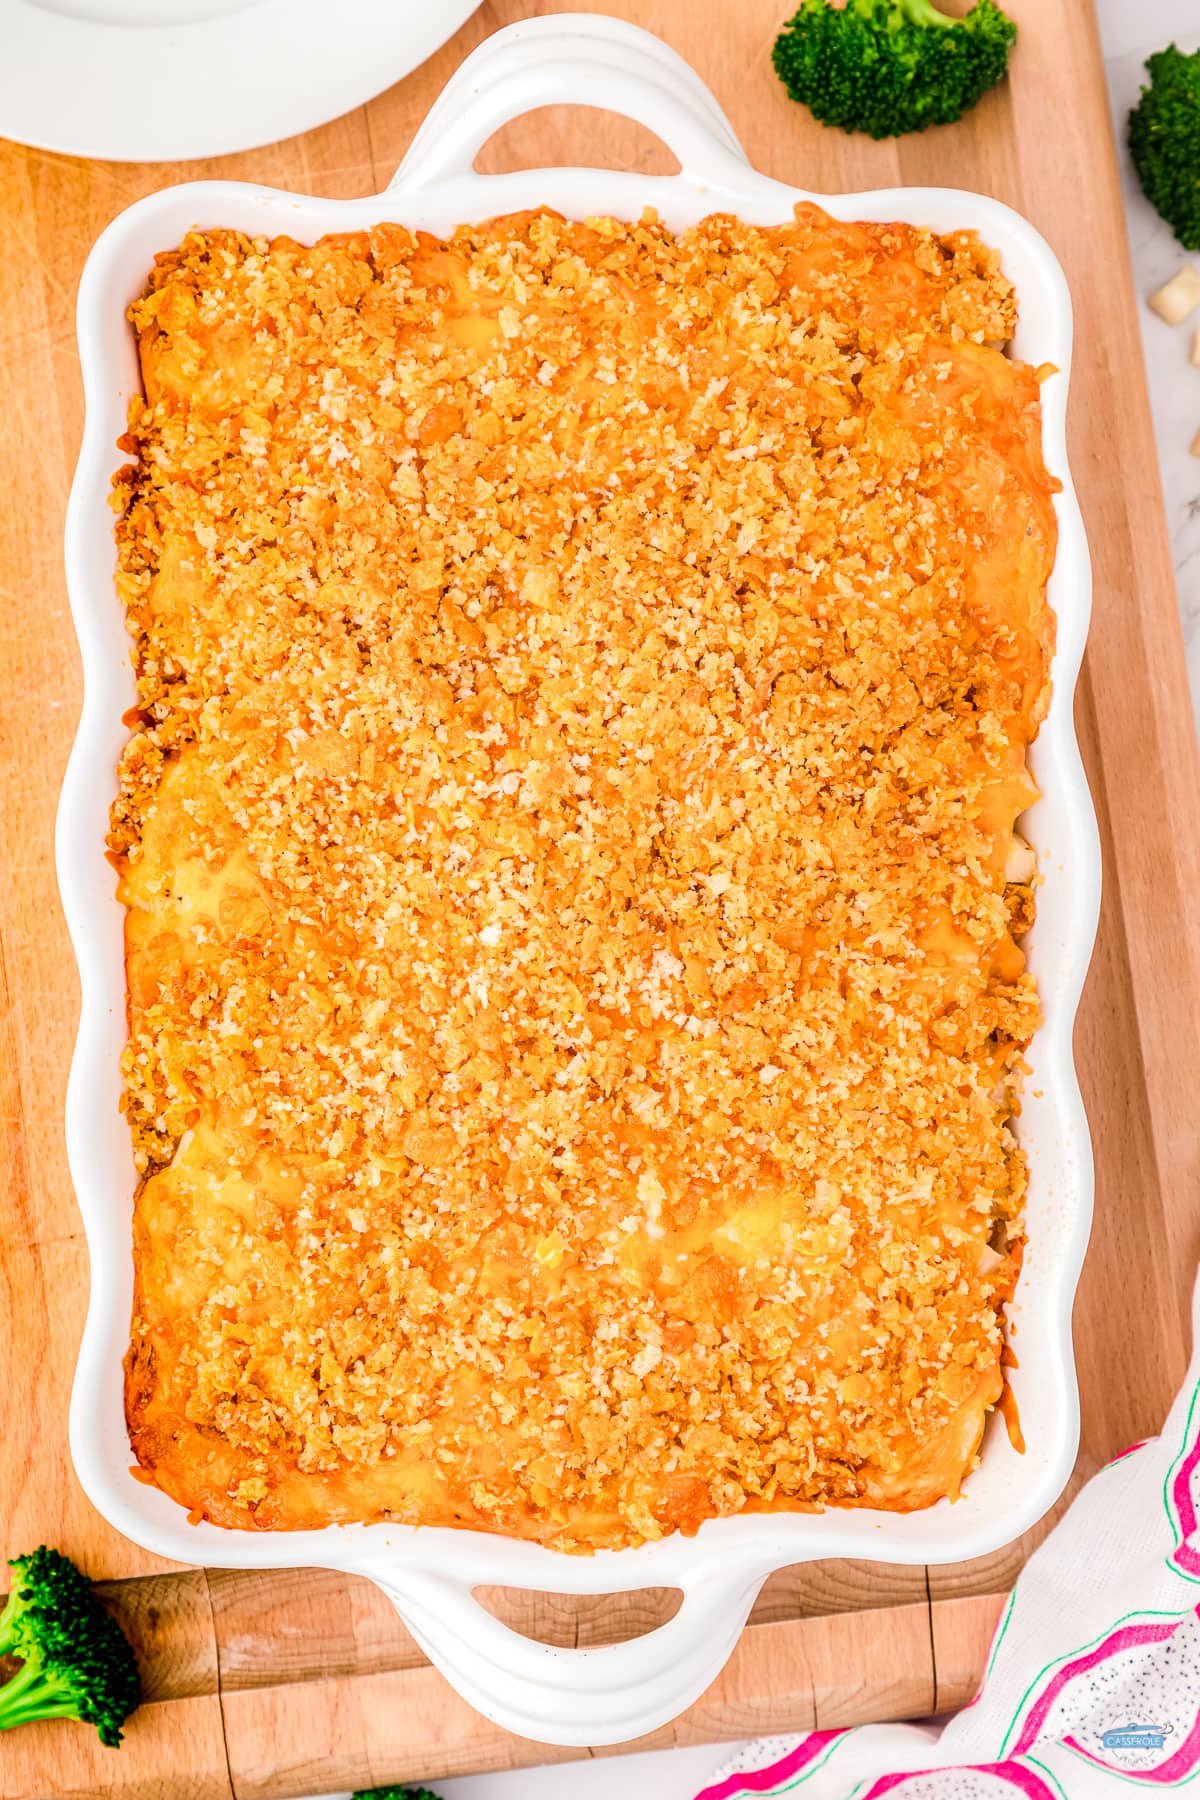 baked casserole in a white dish on a wood cutting board